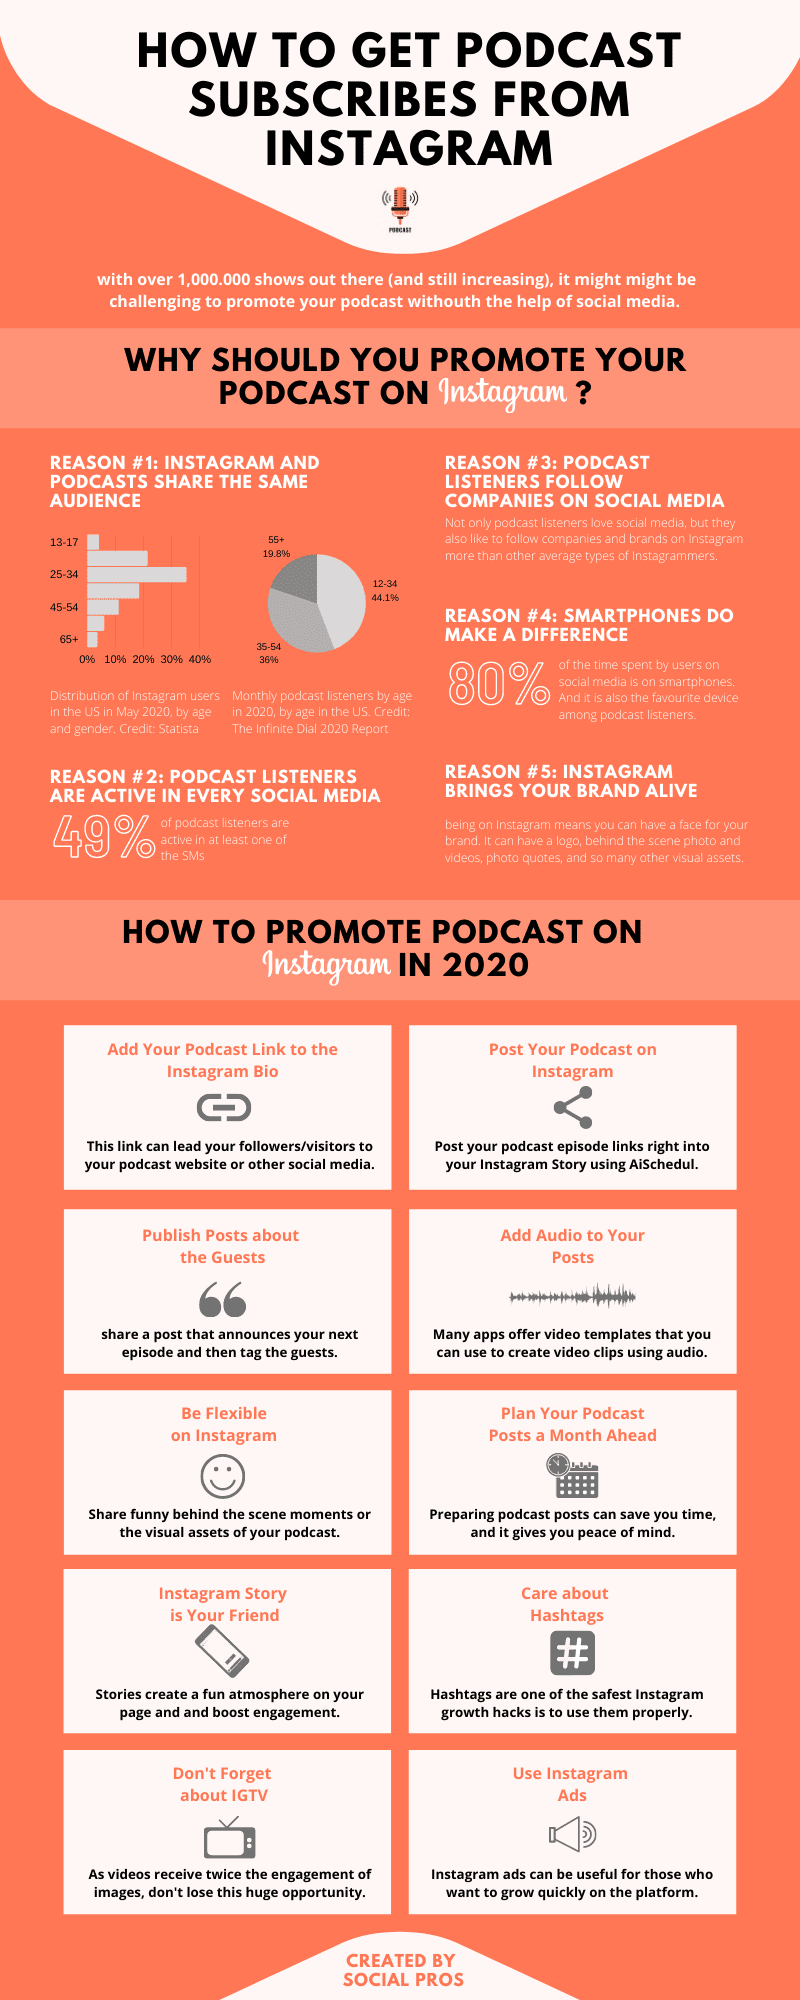 The infographic of How to Get Podcast Subscribes from Instagram